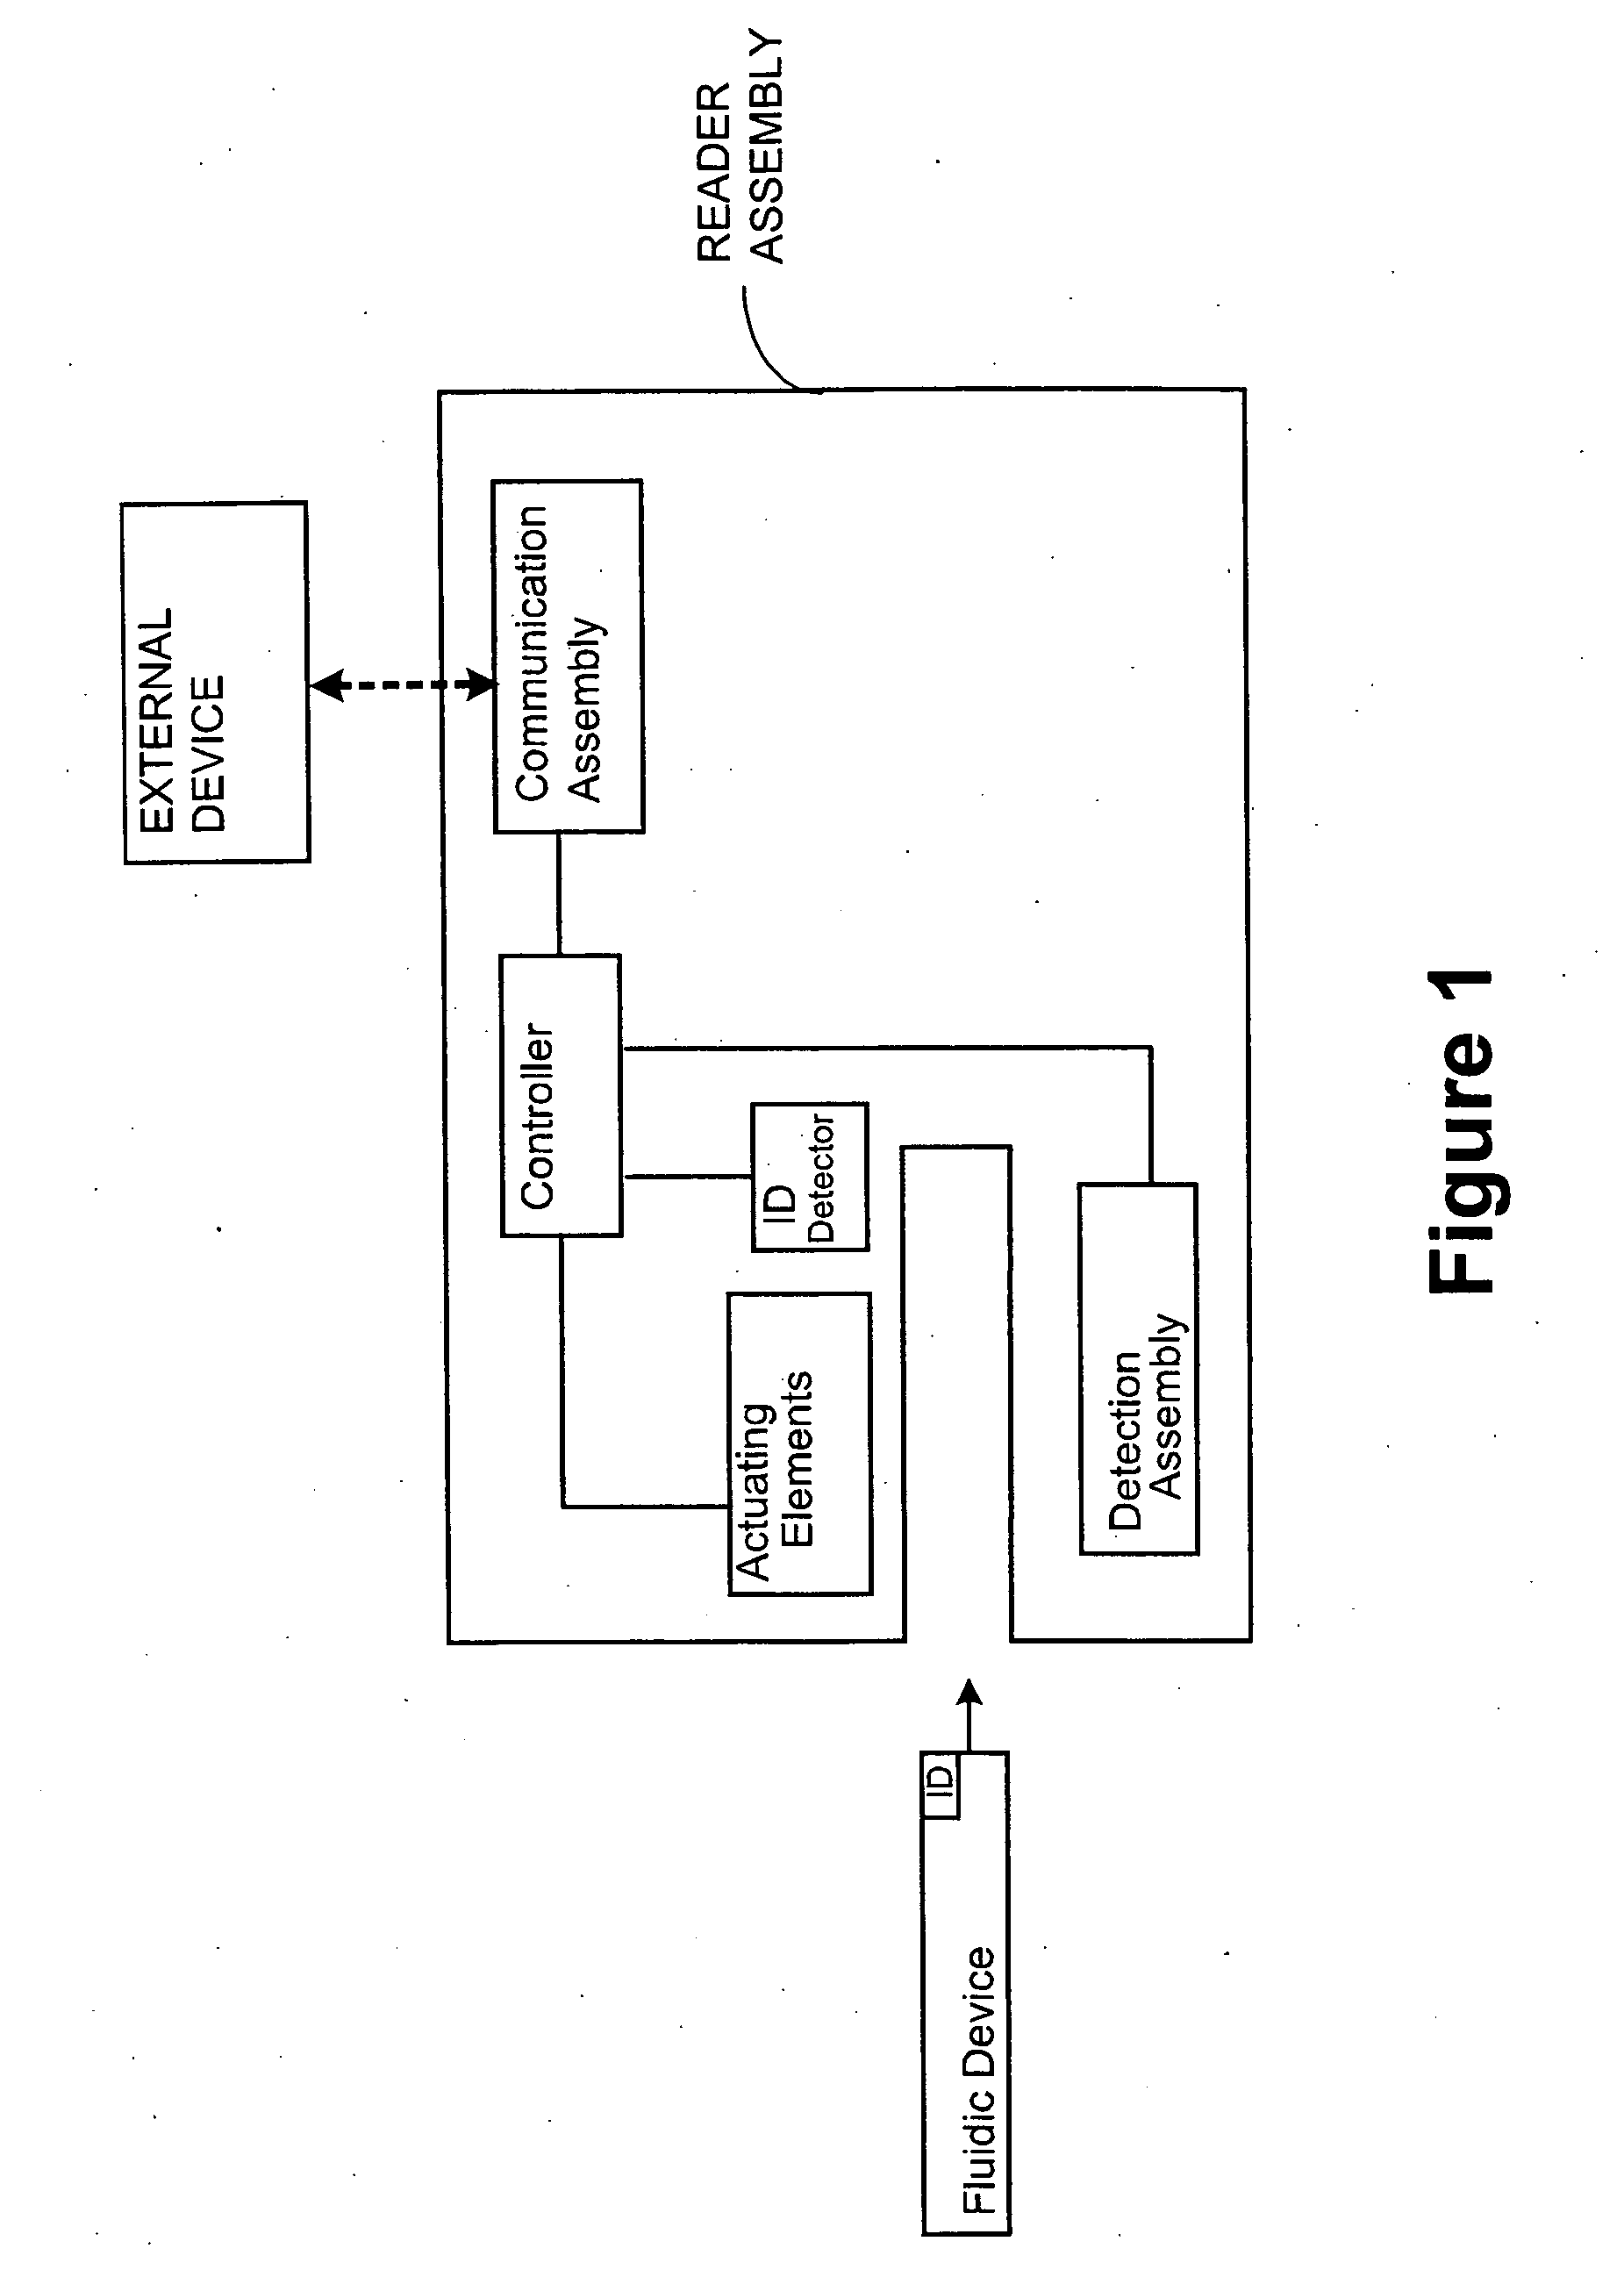 Point-of-care fluidic systems and uses thereof